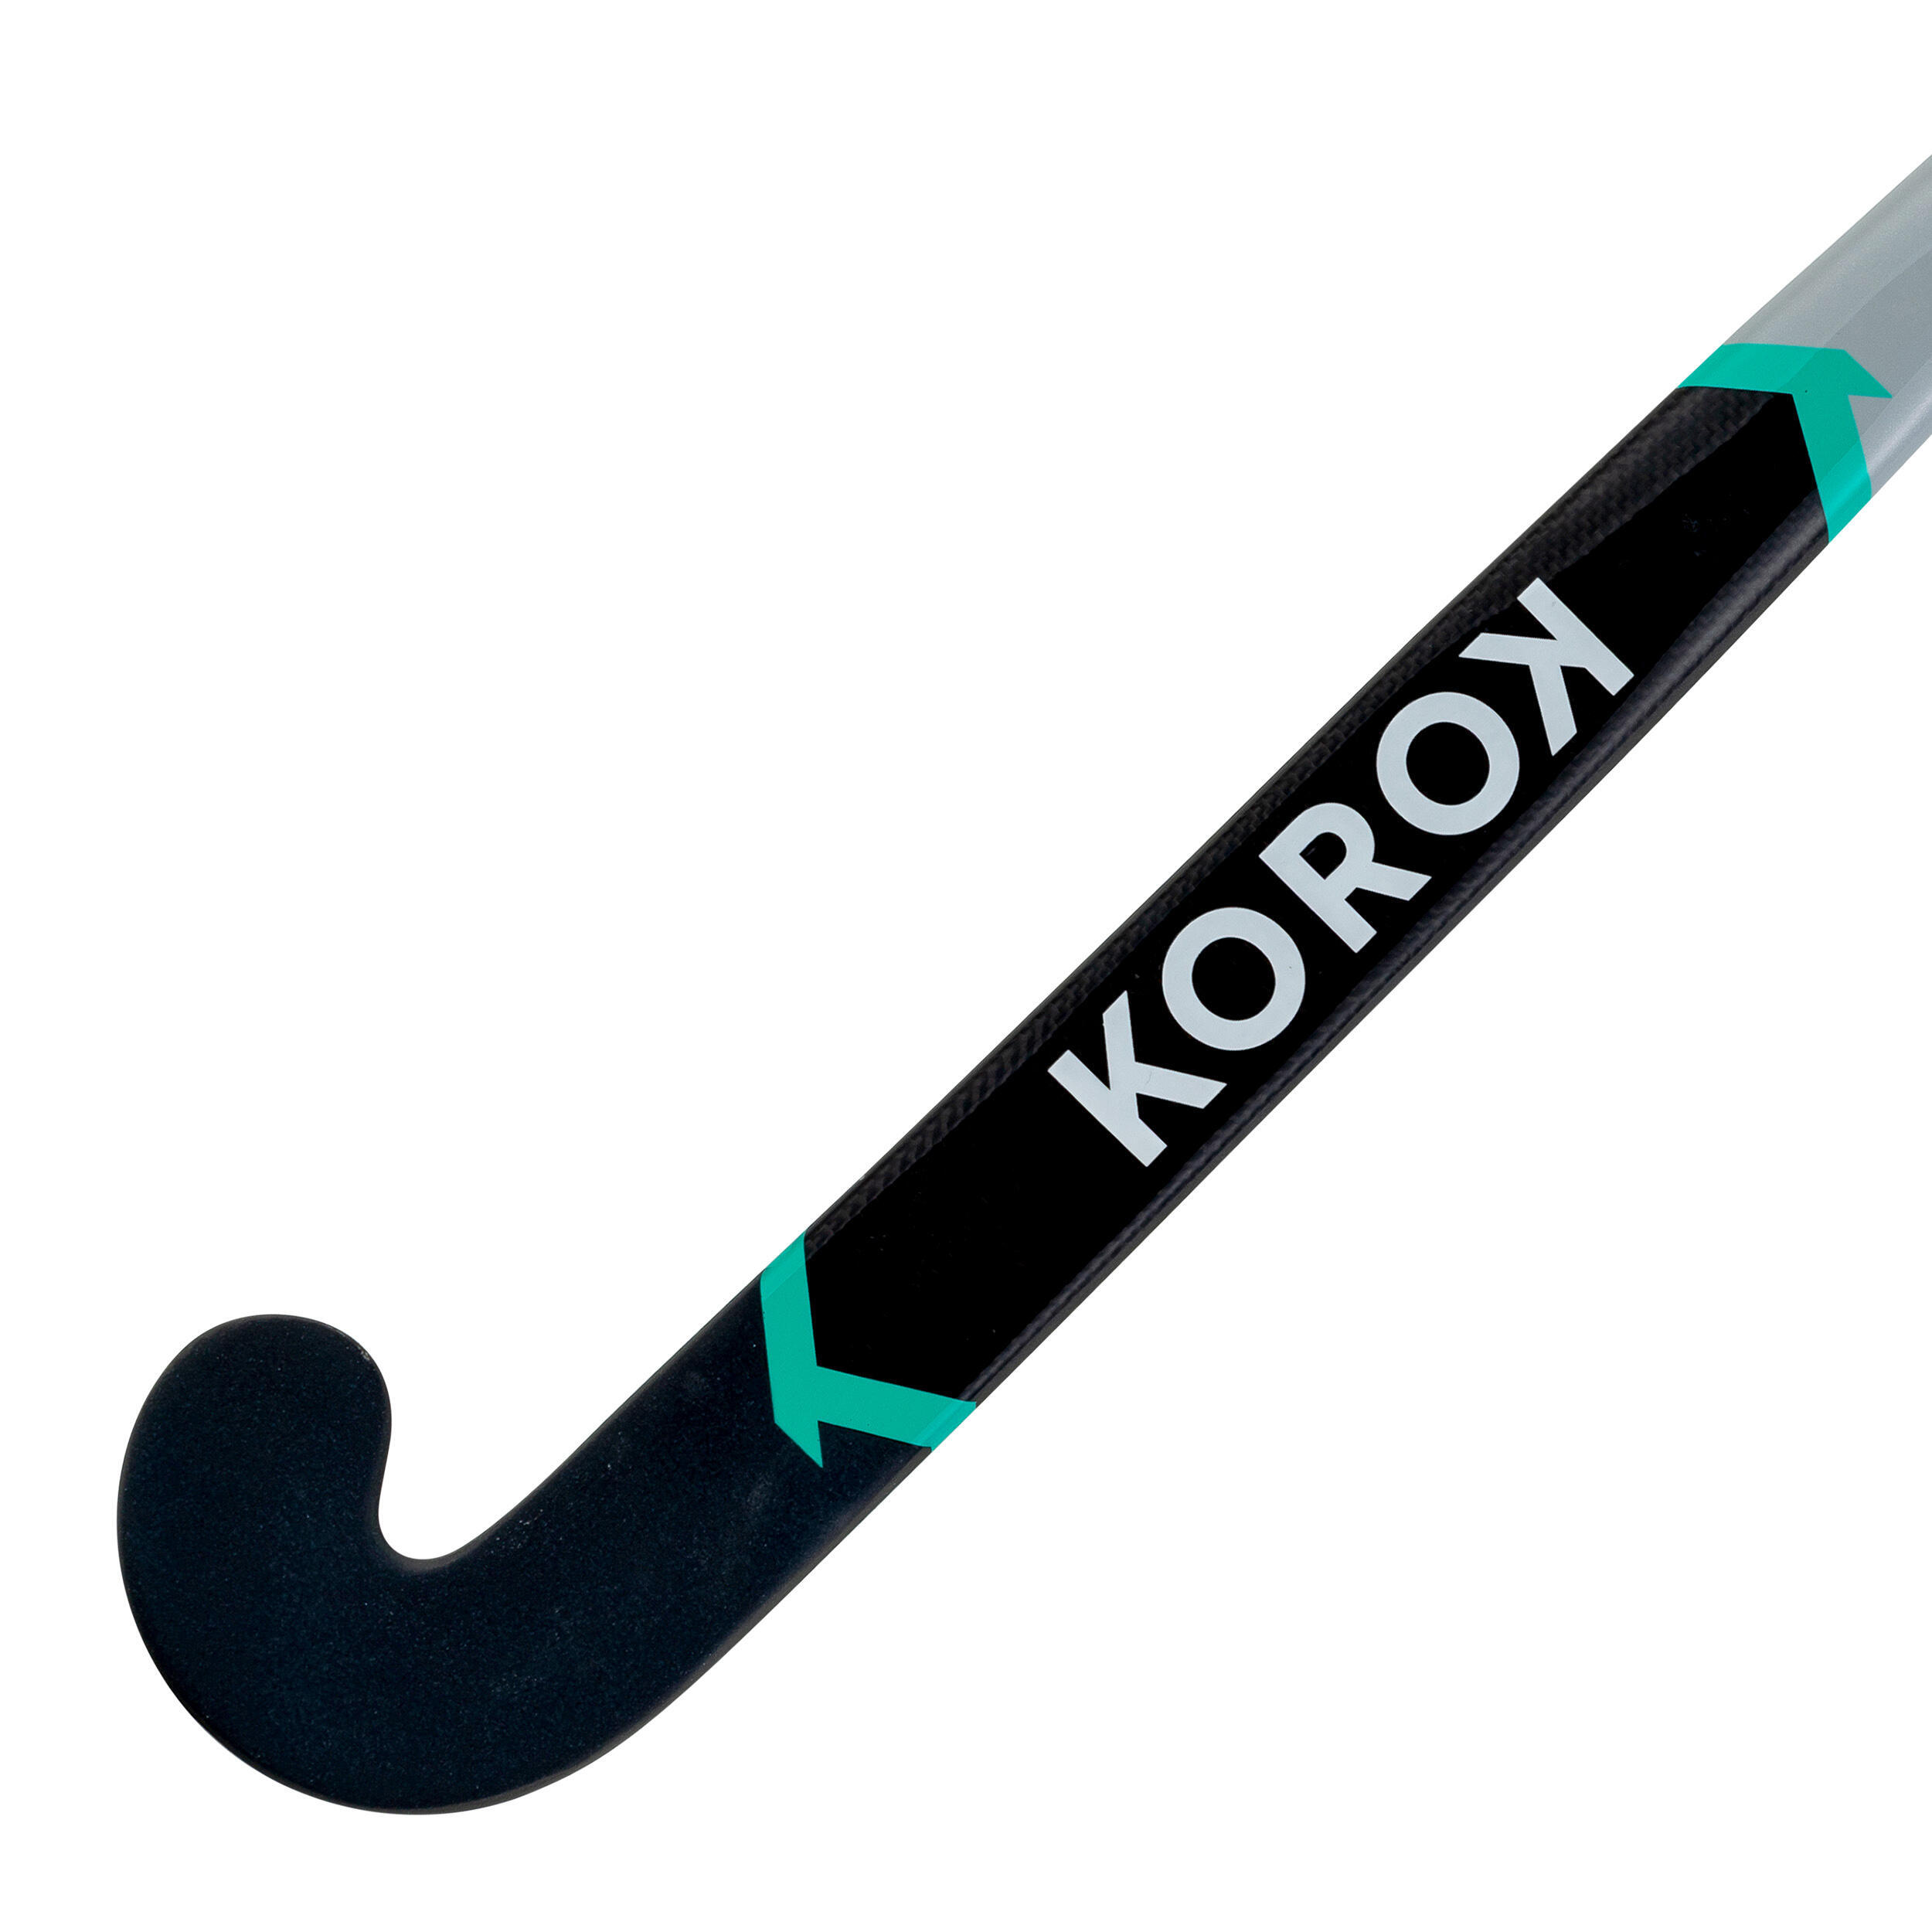 Adult Intermediate 30% Carbon Mid Bow Field Hockey Stick FH530 - Grey/Turquoise 4/12